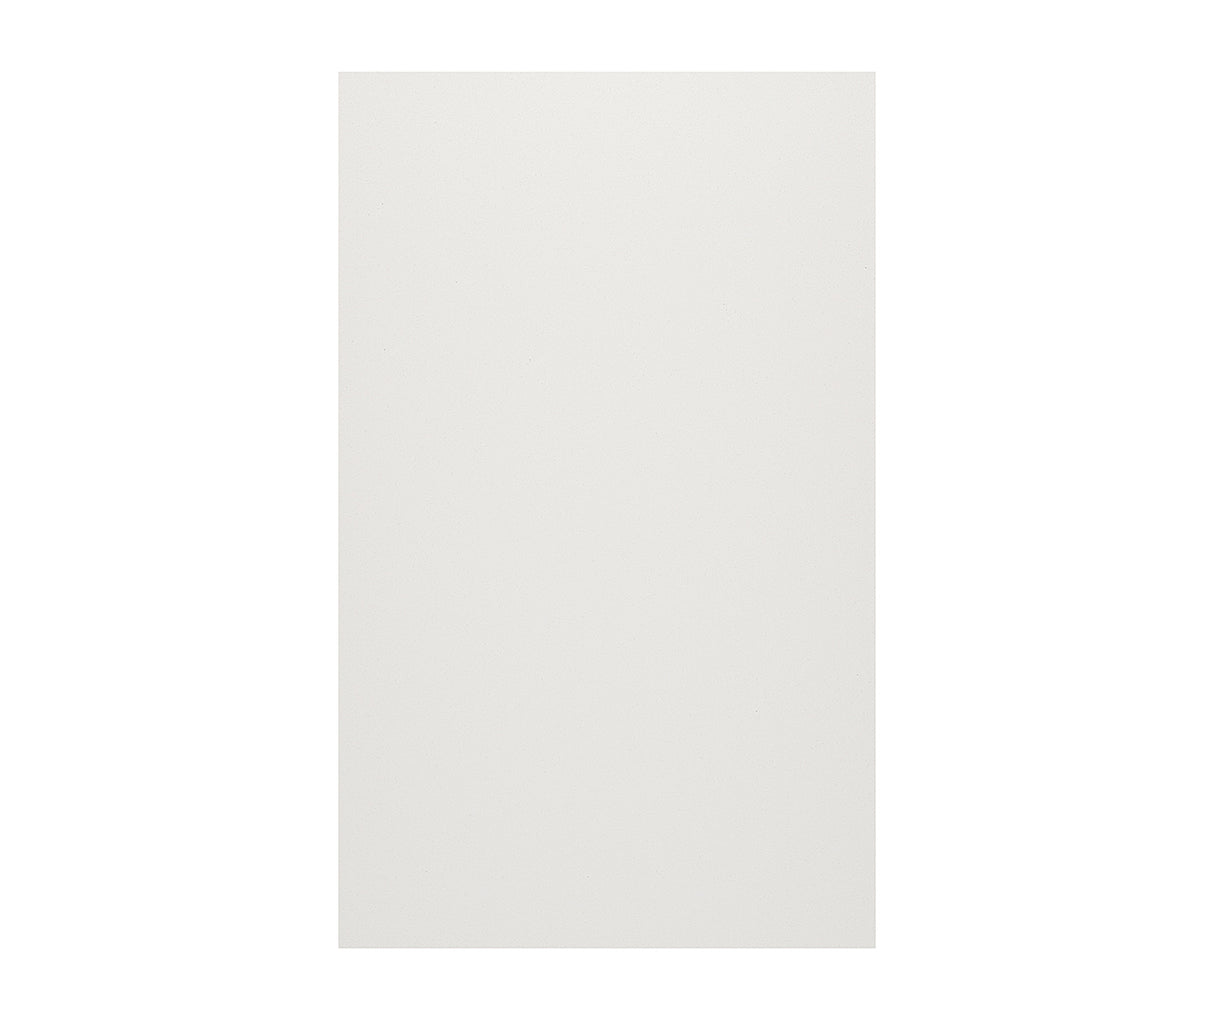 Swanstone SS-6296-1 62 x 96 Swanstone Smooth Glue up Bathtub and Shower Single Wall Panel in Birch SS0629601.226